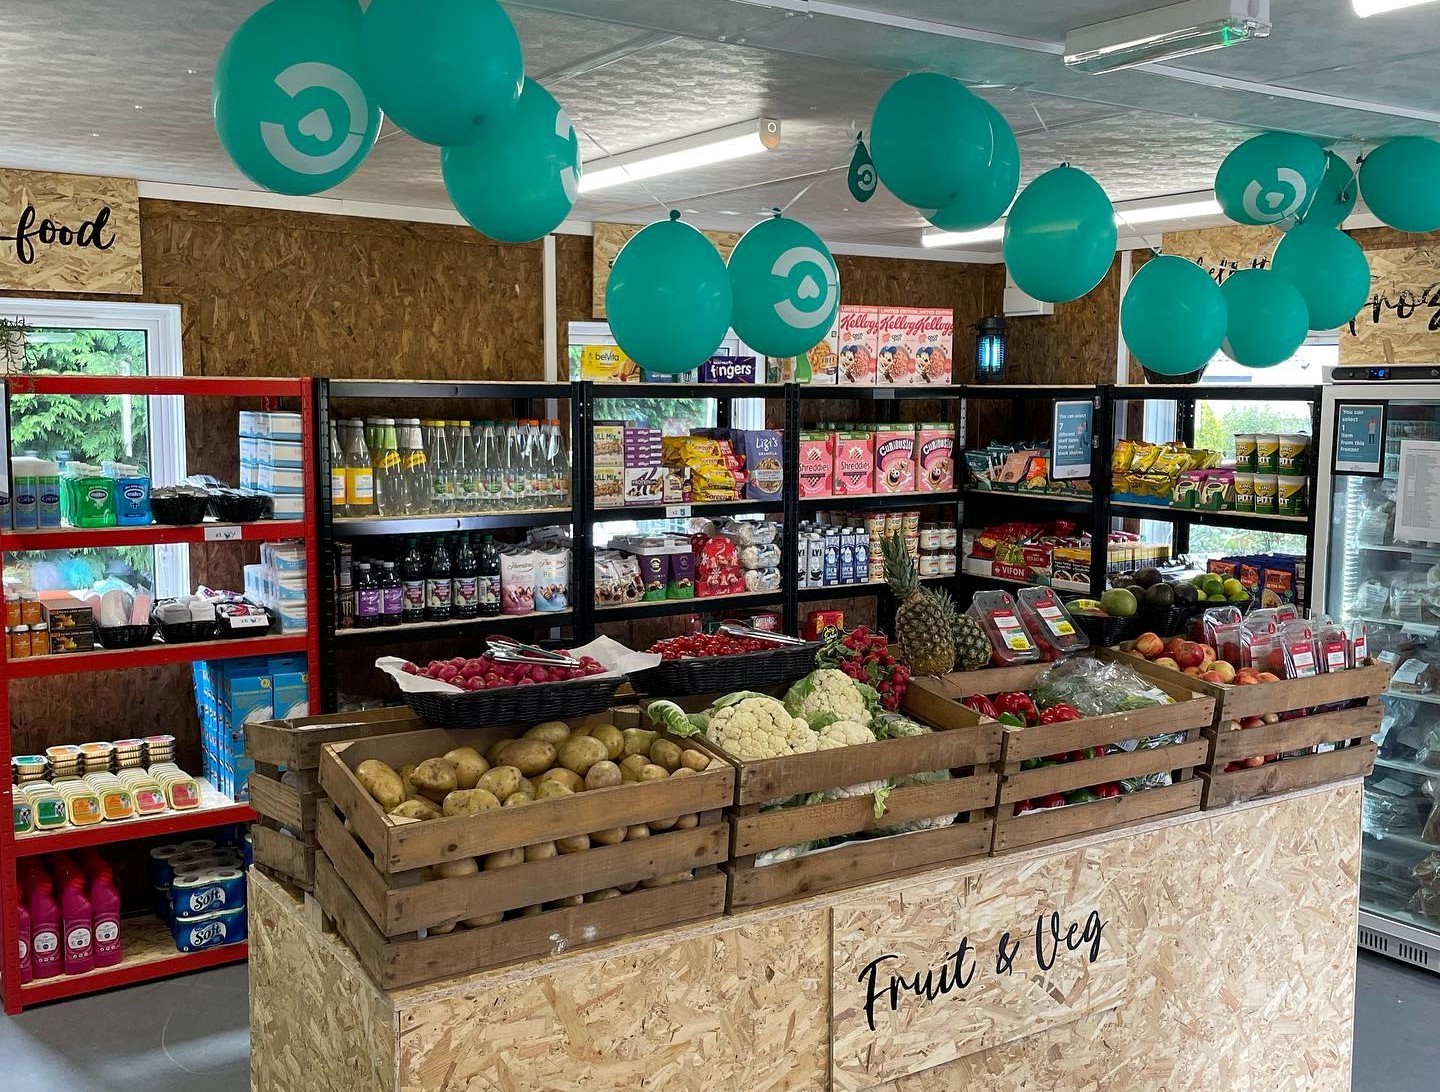 The store provides fresh fruit and vegetables